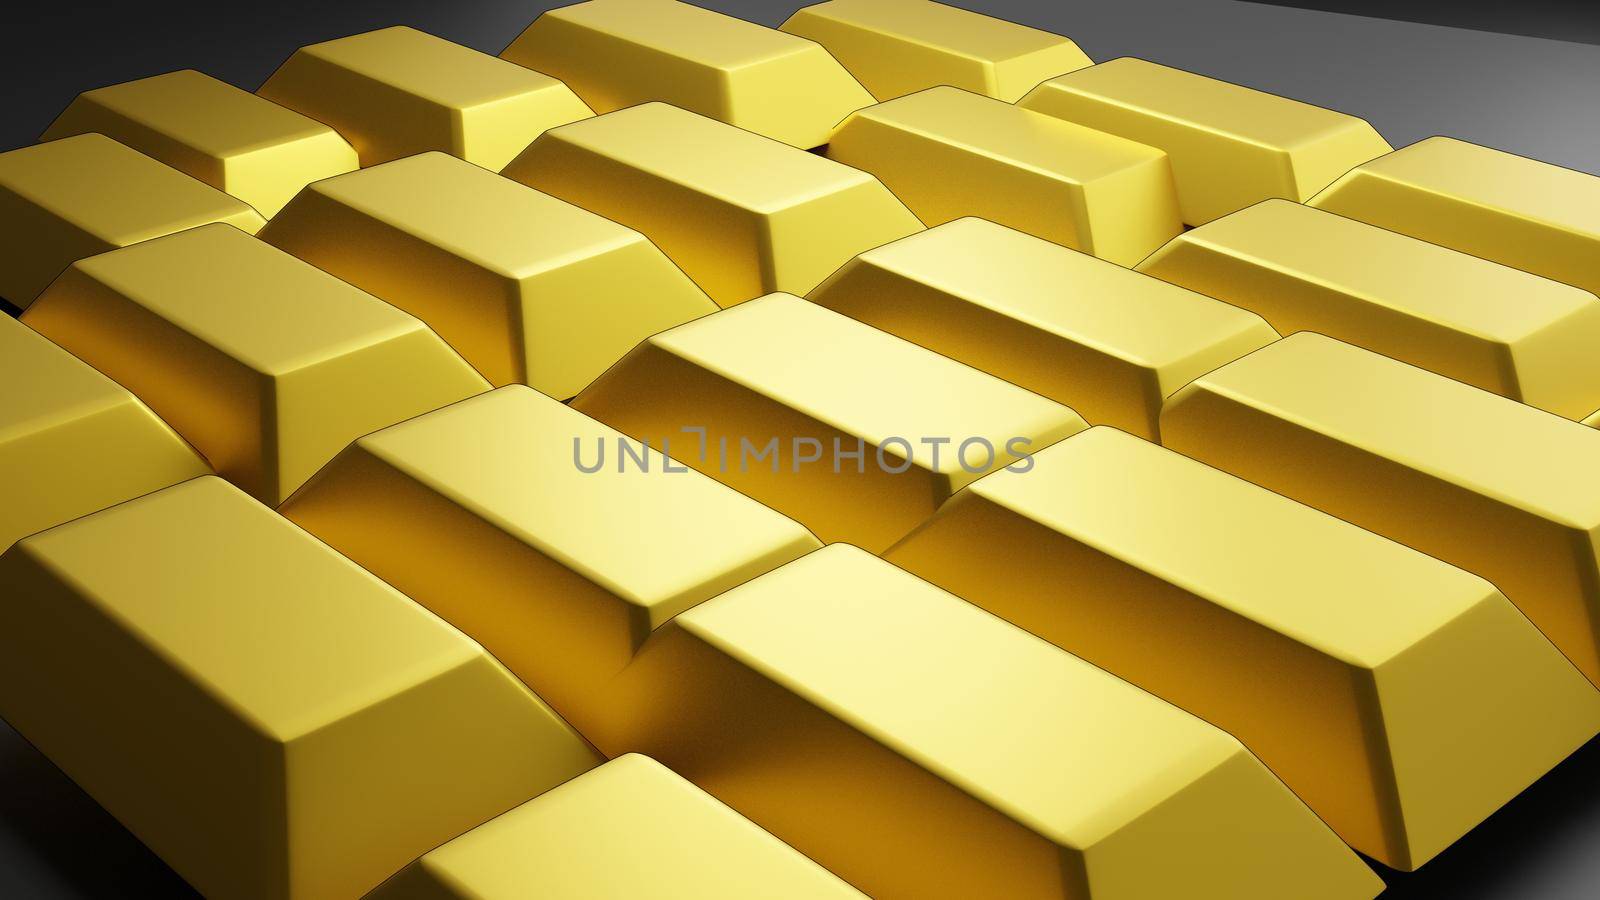 Simulated gold bar on black background, 3d rendering.